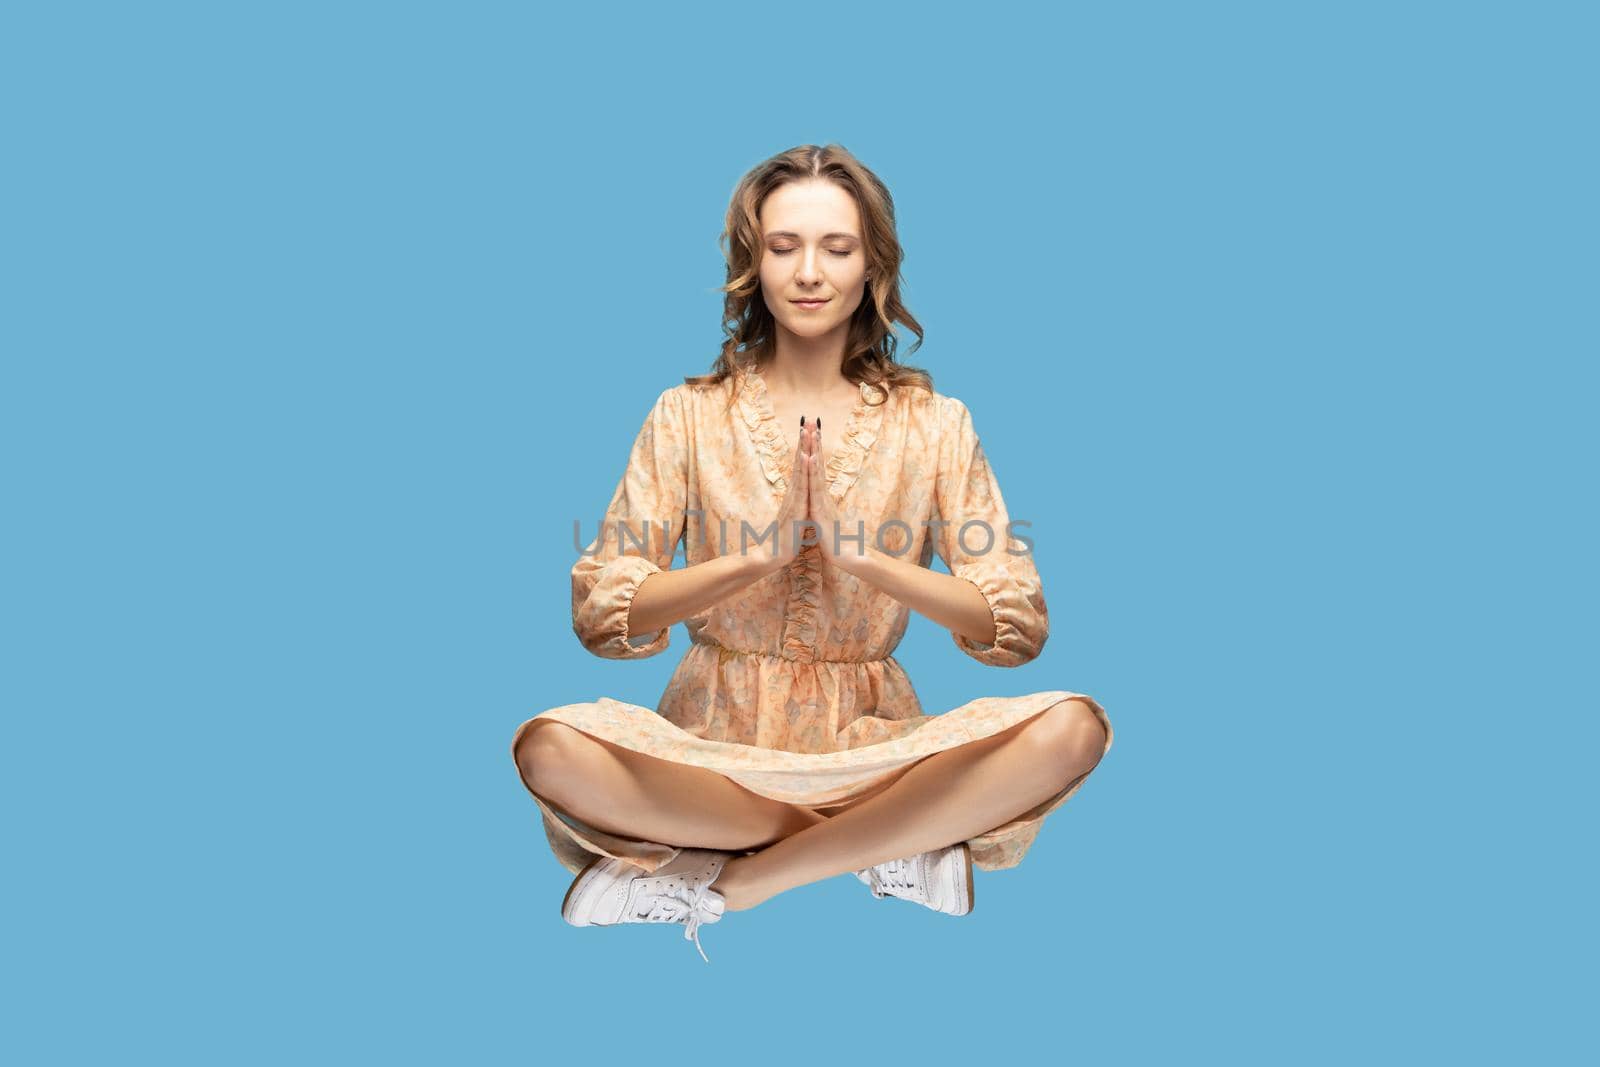 Hovering in air. Peaceful calm relaxed girl yellow dress levitating with prayer gesture, keeping eyes closed, meditating sitting in yoga position. indoor studio shot isolated on blue background